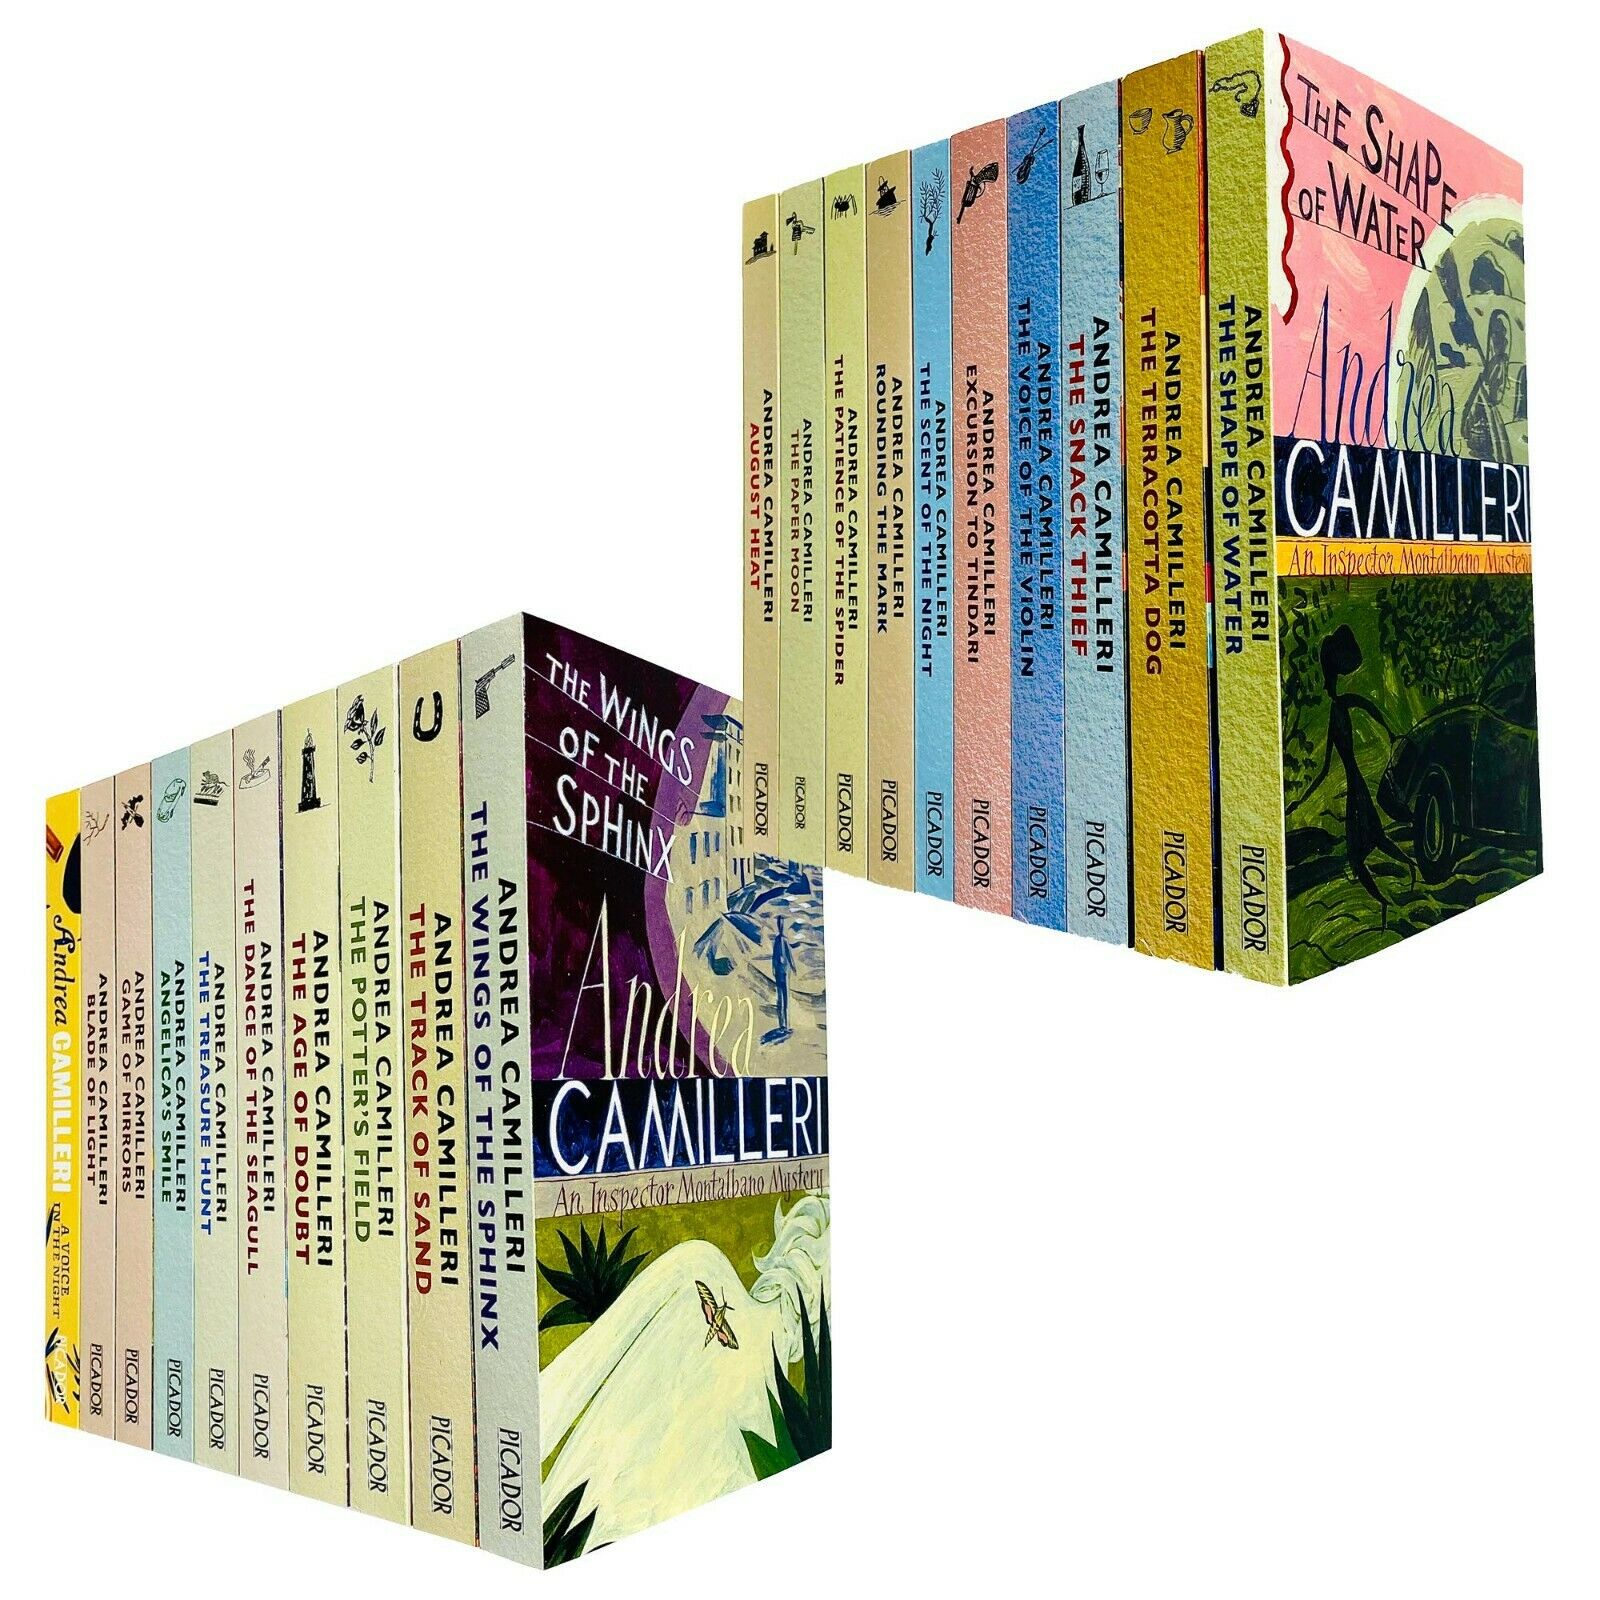 An Inspector Montalbano Mystery 20 Books Adult Collection Paperback By Andrea Camilleri - St Stephens Books